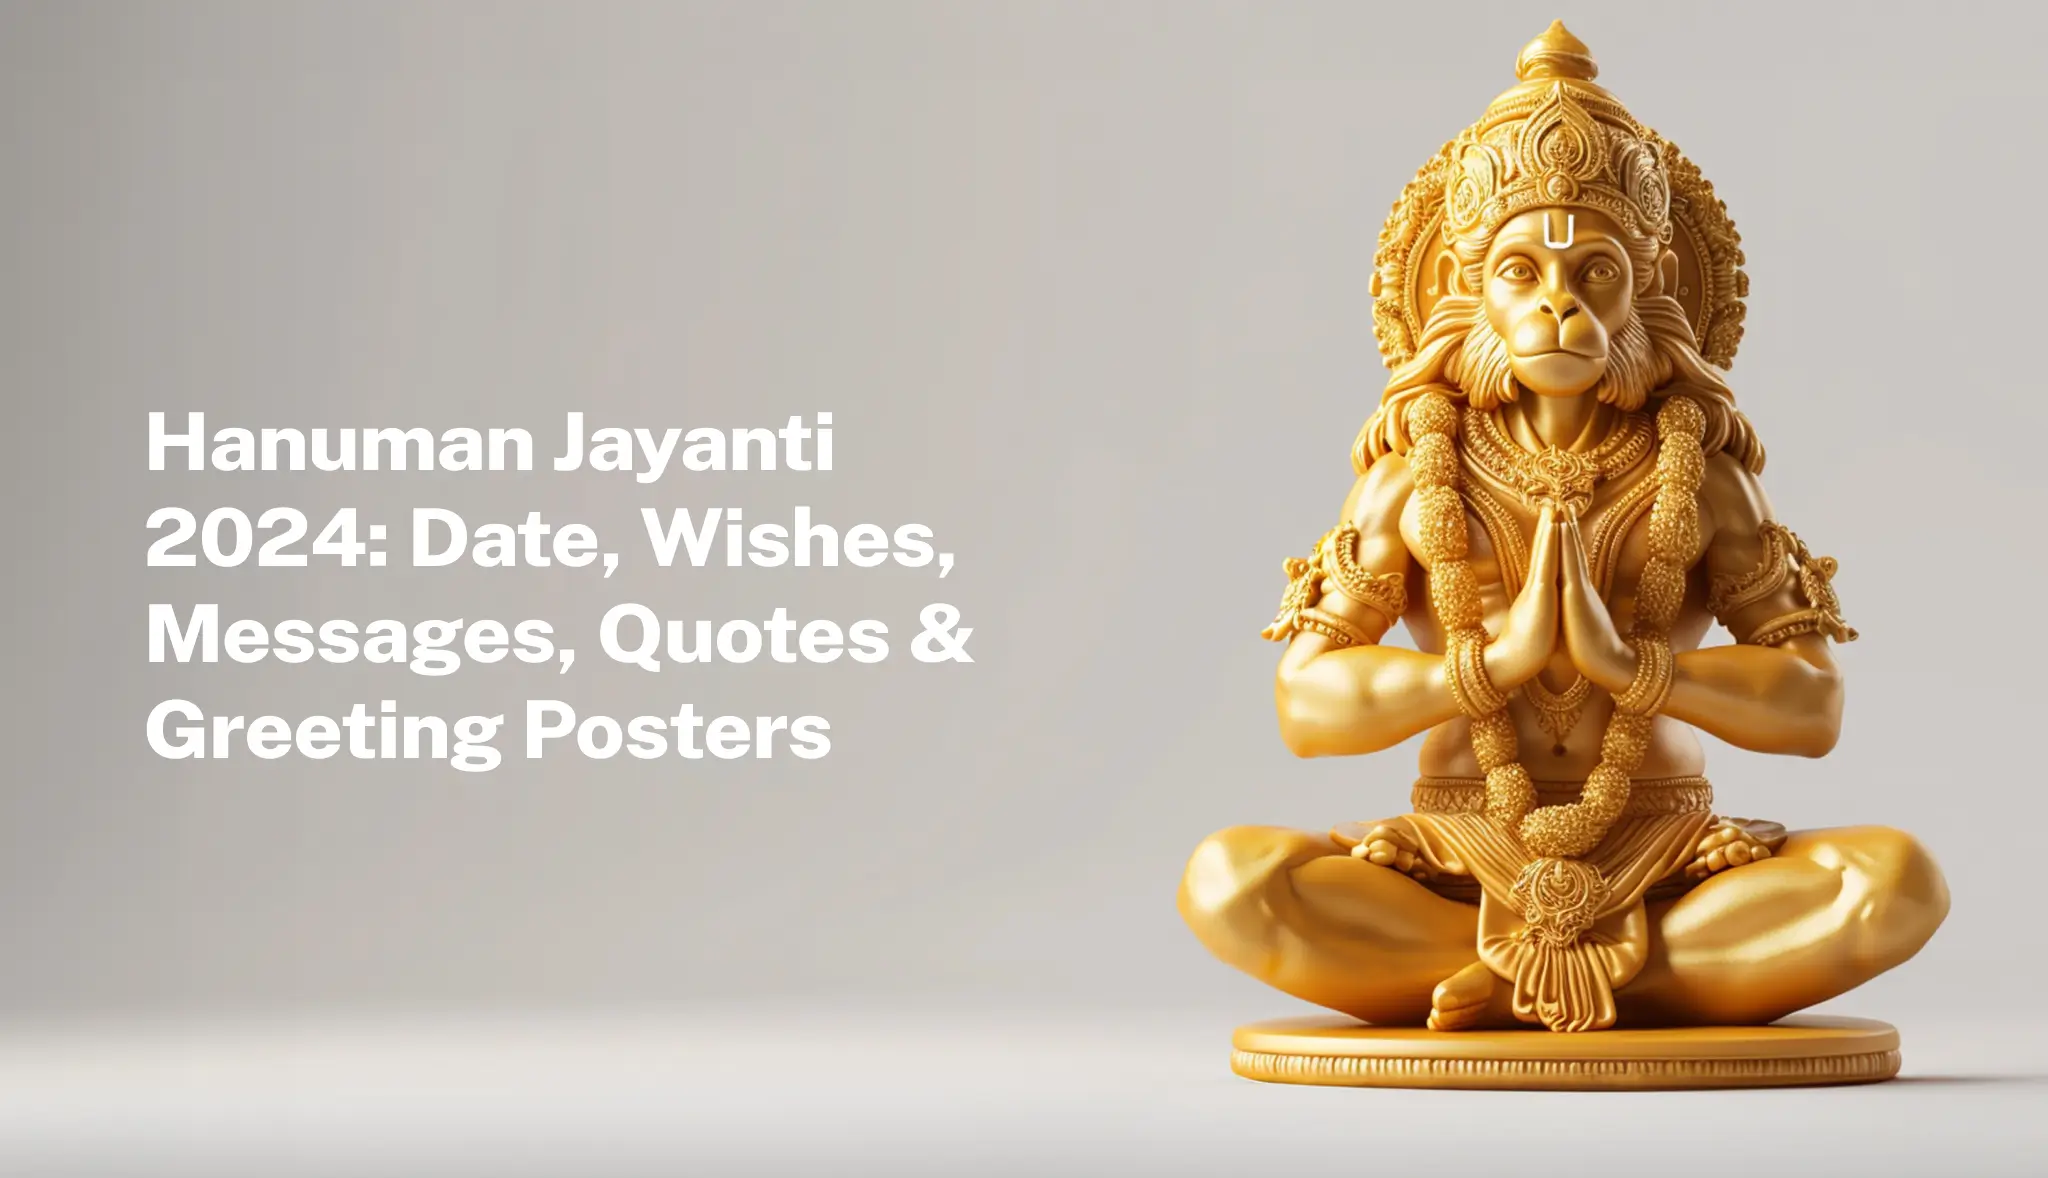 Hanuman Jayanti 2024: Date, Wishes, Messages & Greeting Posters - Postive